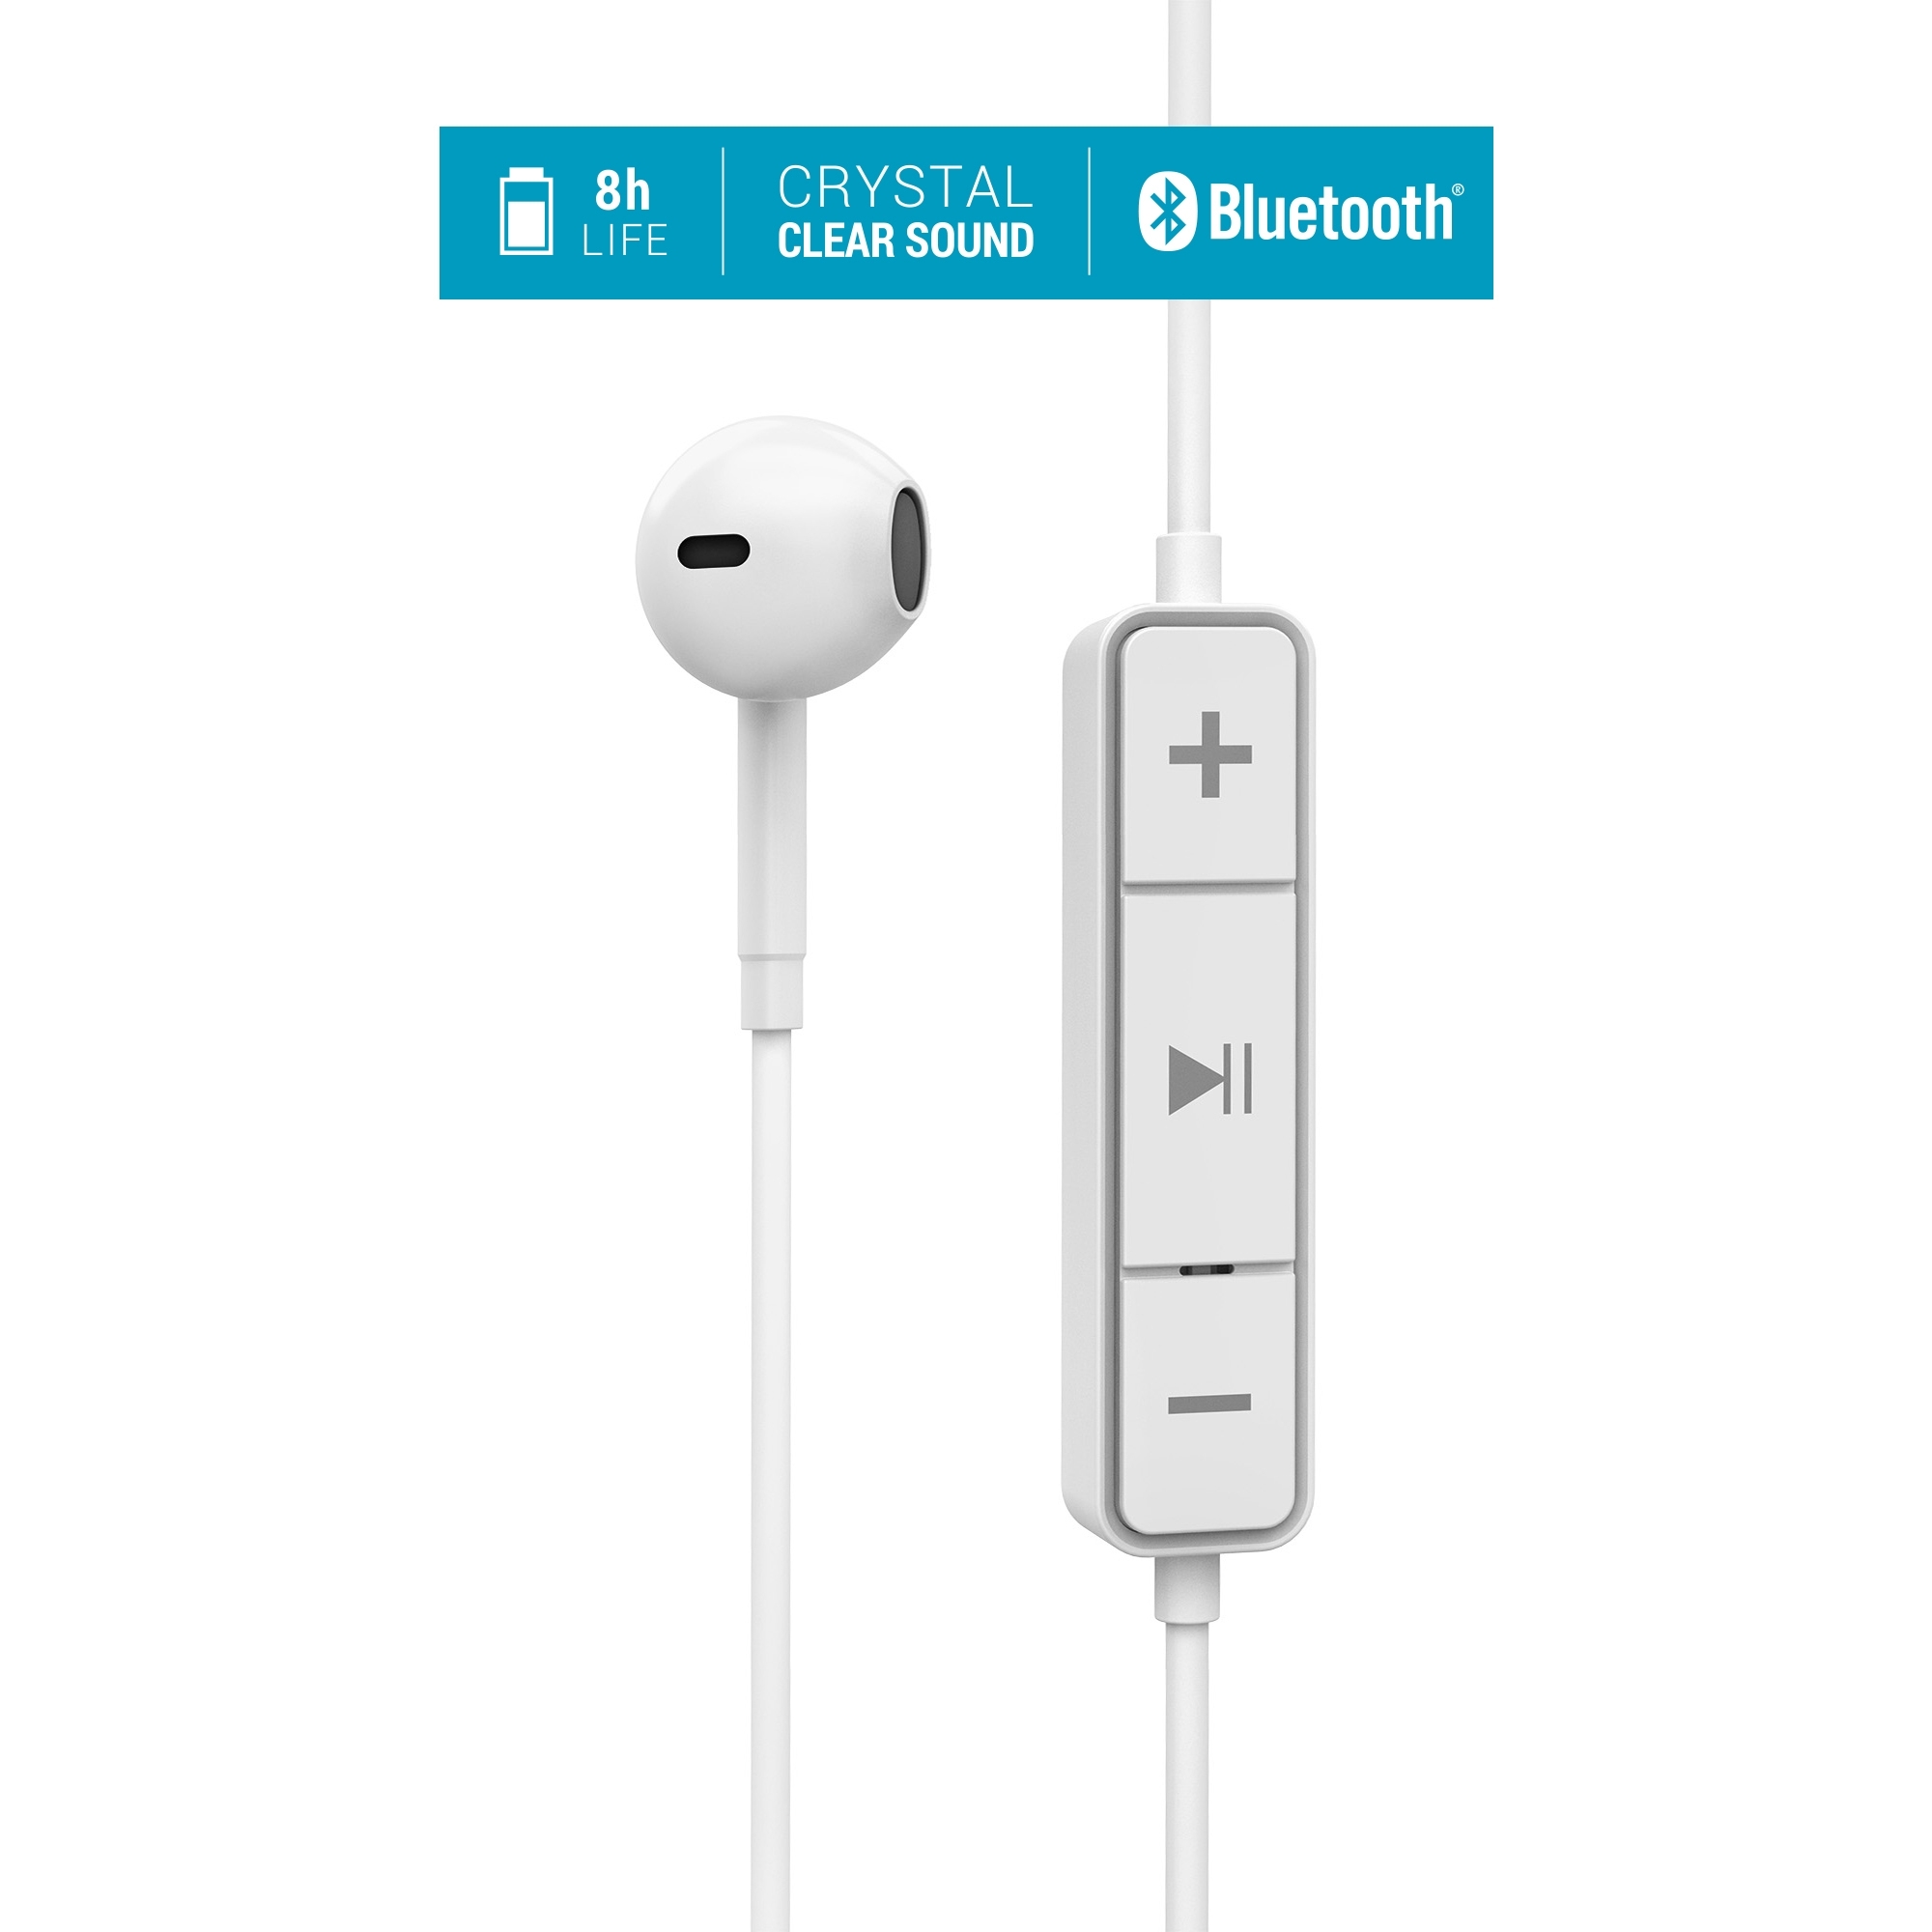 White wireless earphones featuring Bluetooth technology